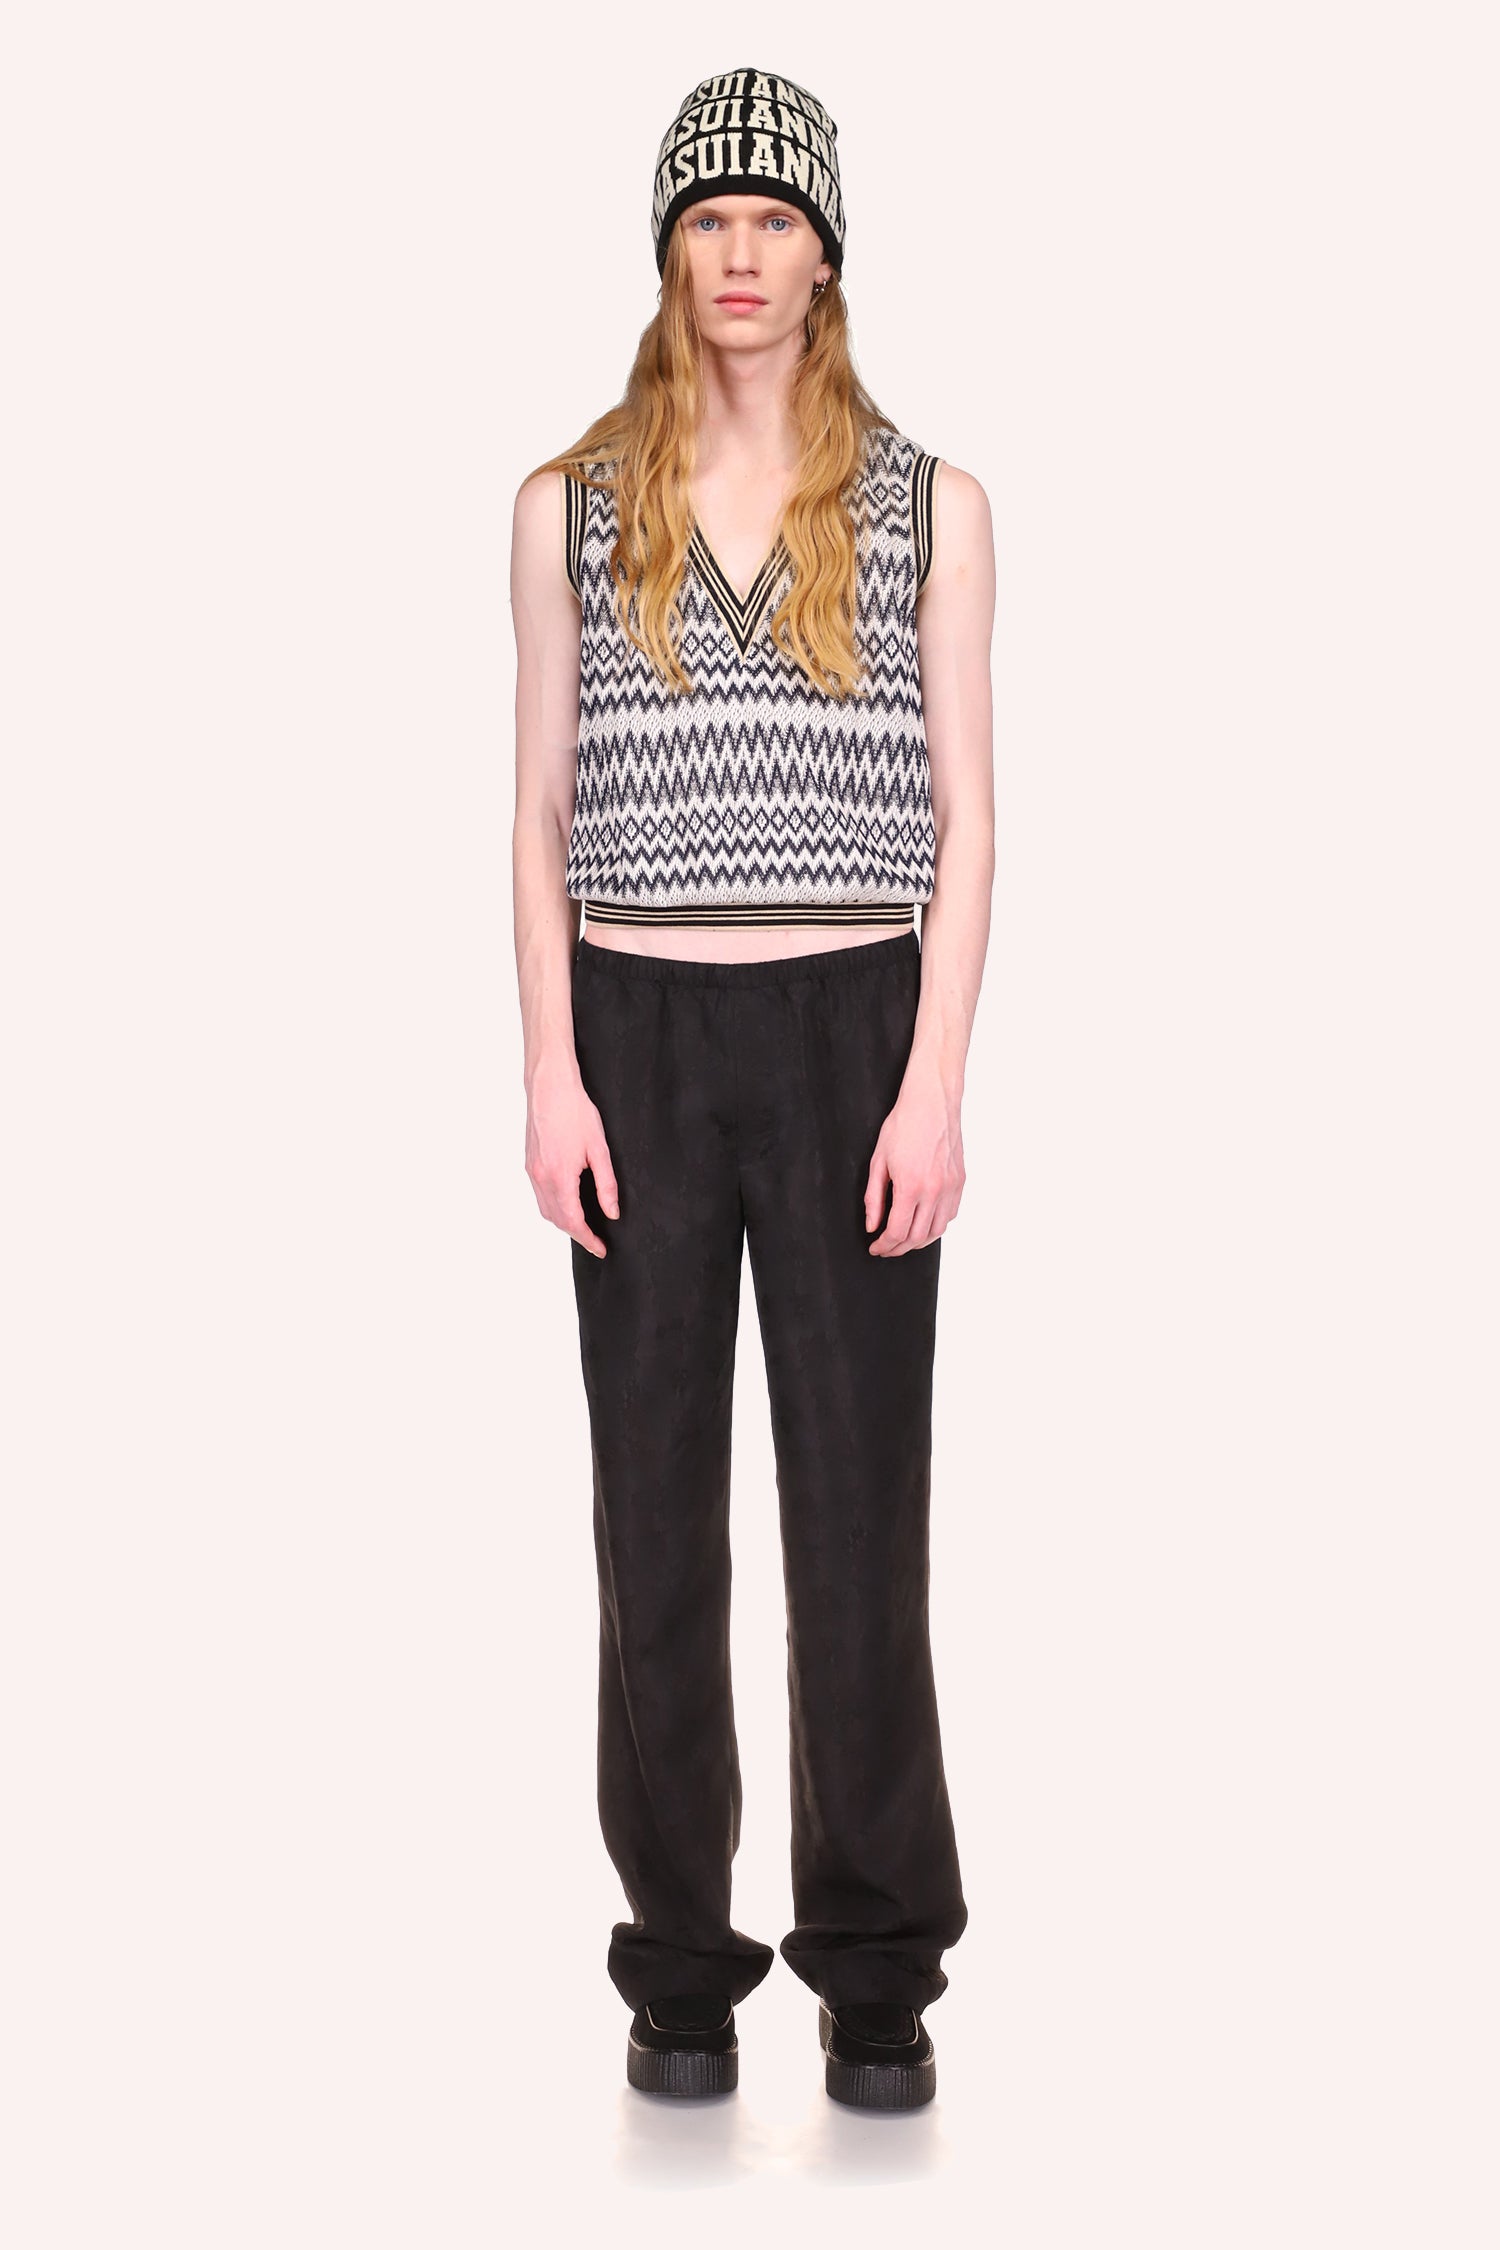 Long pants over the shoes, Floral Jacquard Black, waist band, paired with Zigzag Vest Black